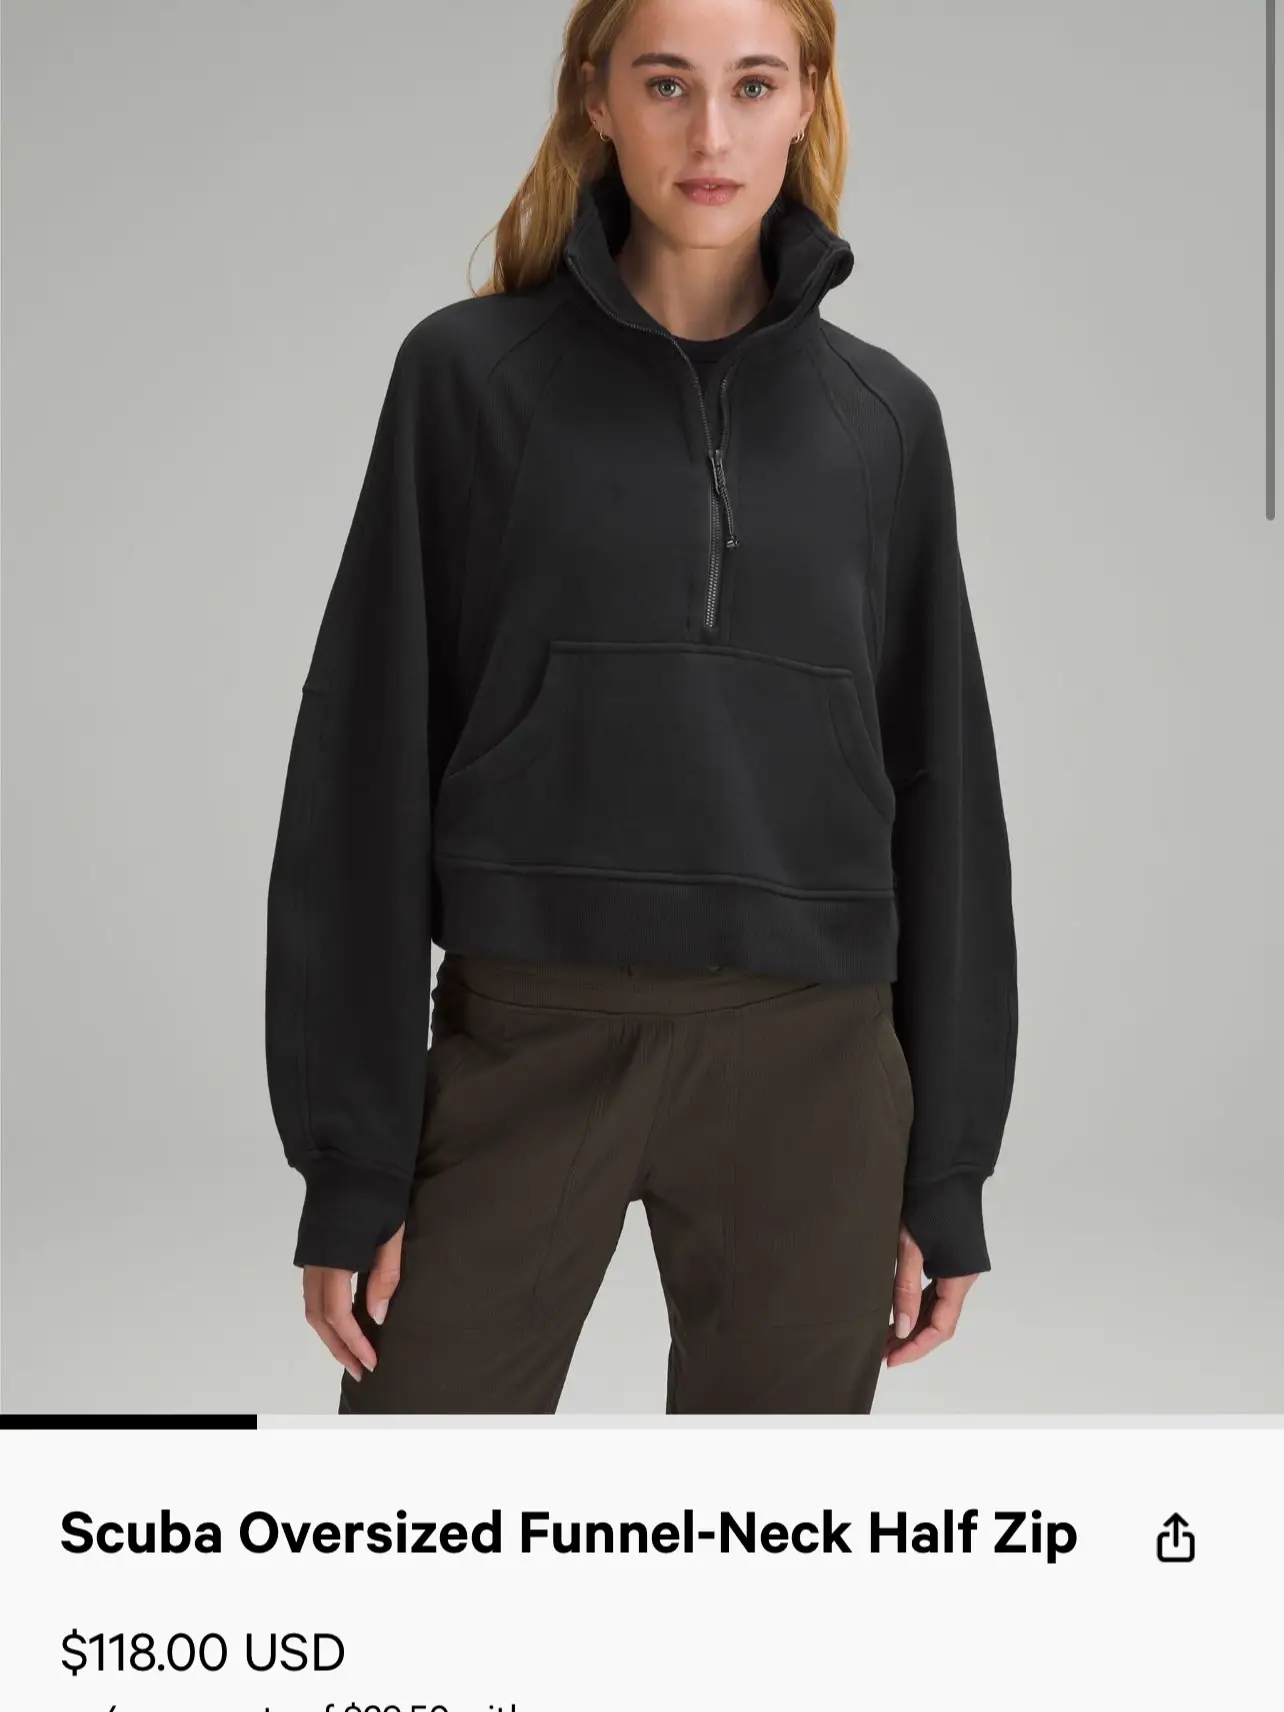 Just received my Scuba Oversized Funnel Neck Half-Zip in Smoky Red! : r/ lululemon